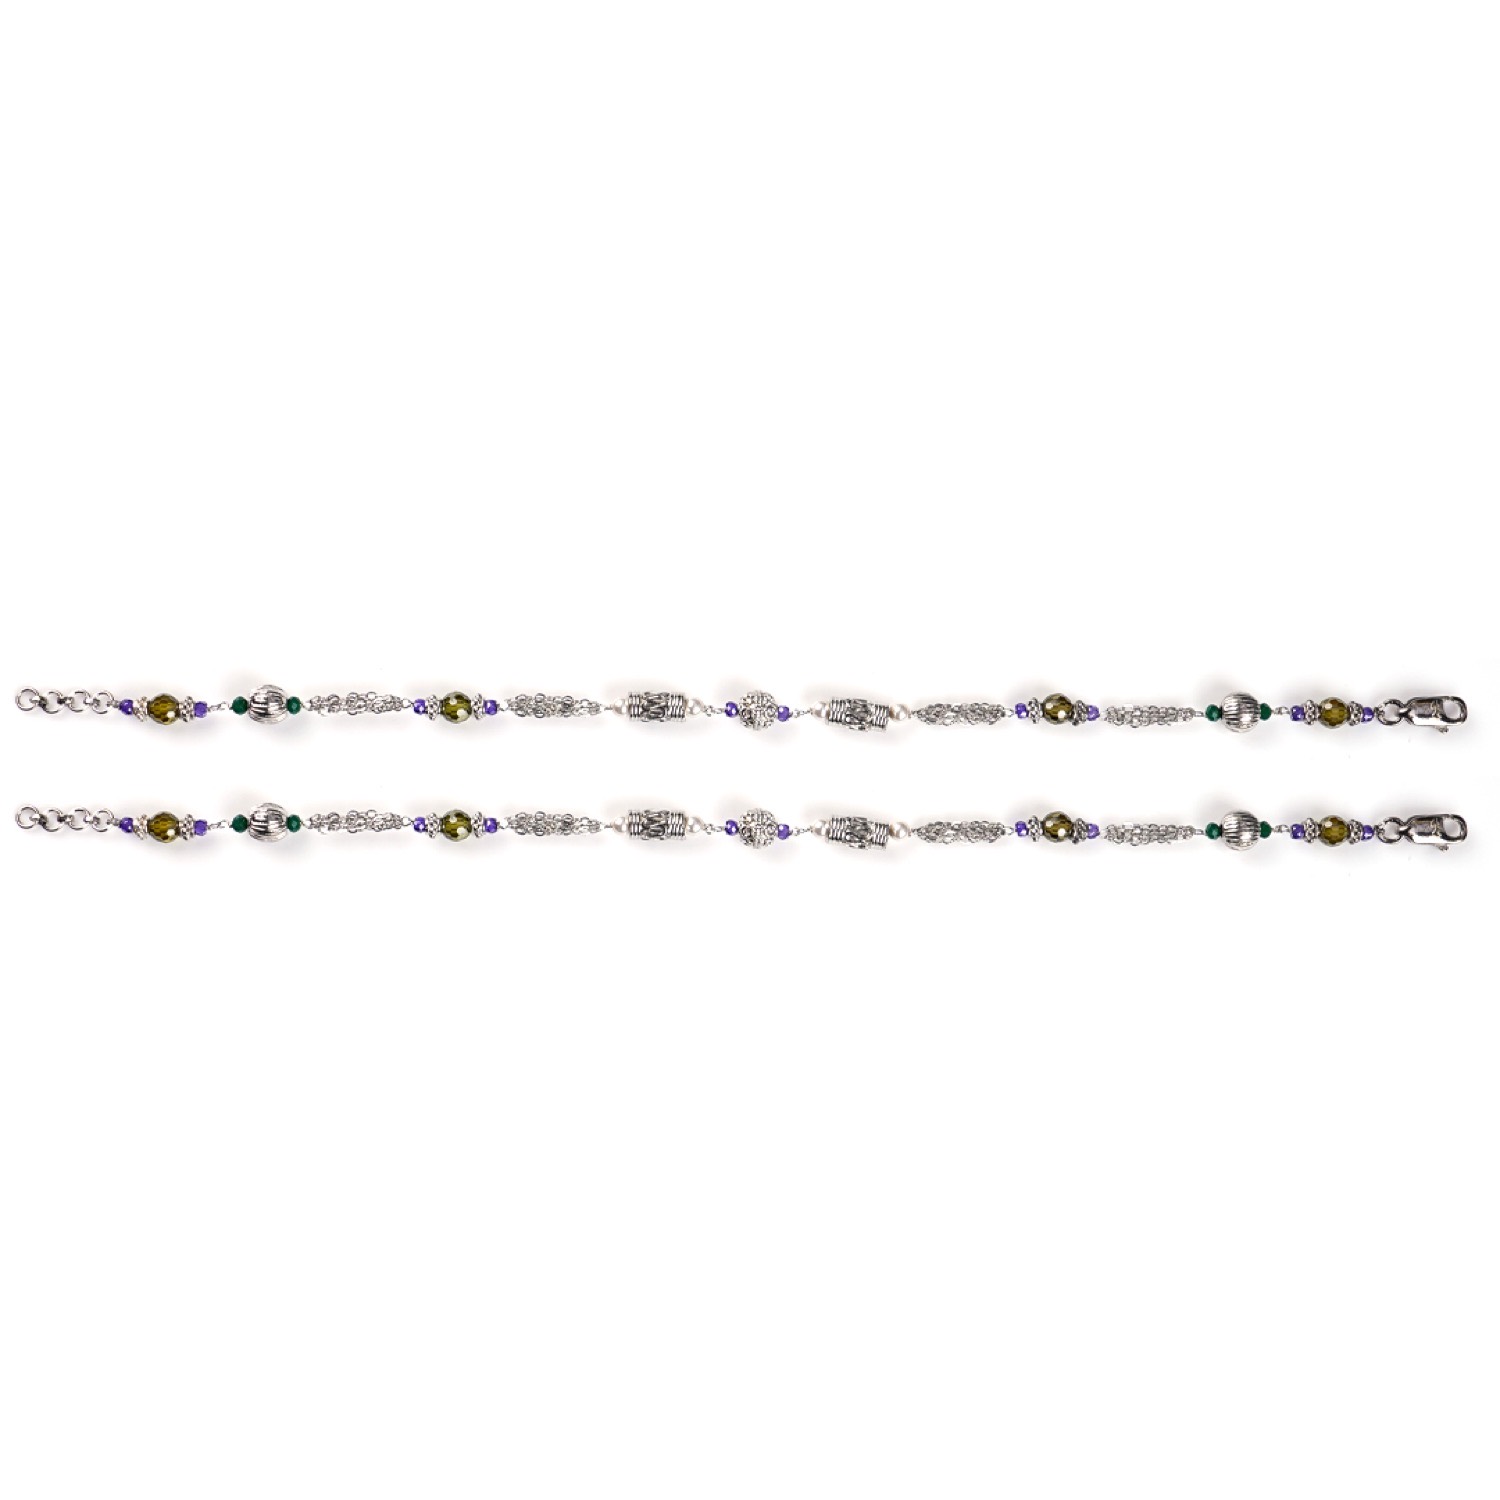 varam_anklets_072022_mossy_green_stone_silver_anklets_4-1